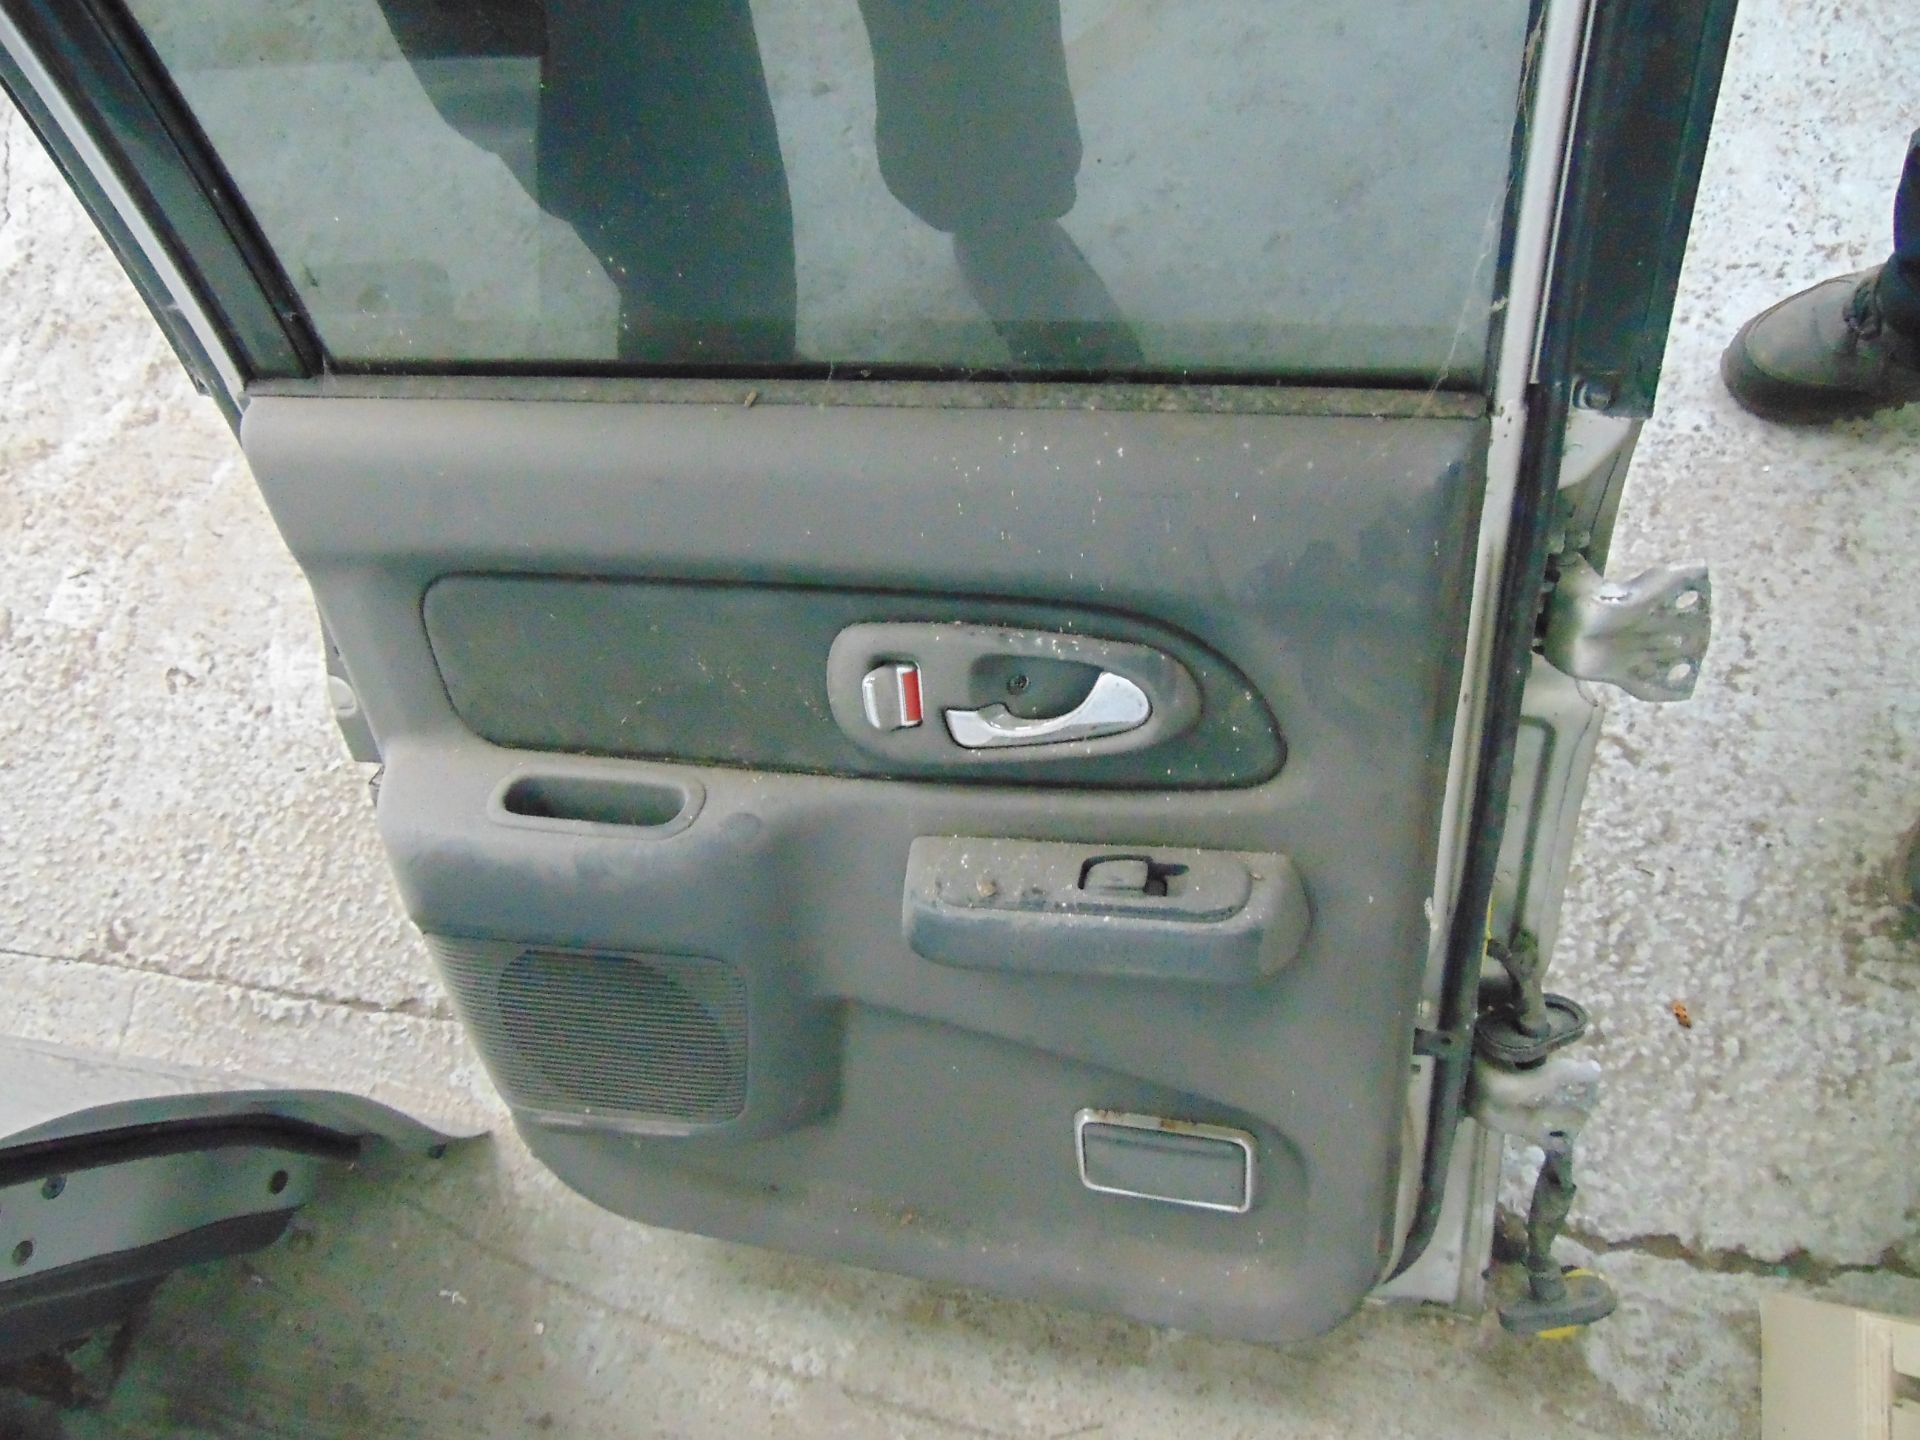 L200 warrior doors in silver o/s front o/s rear n/s front n/s rear and tailgate - Image 11 of 12